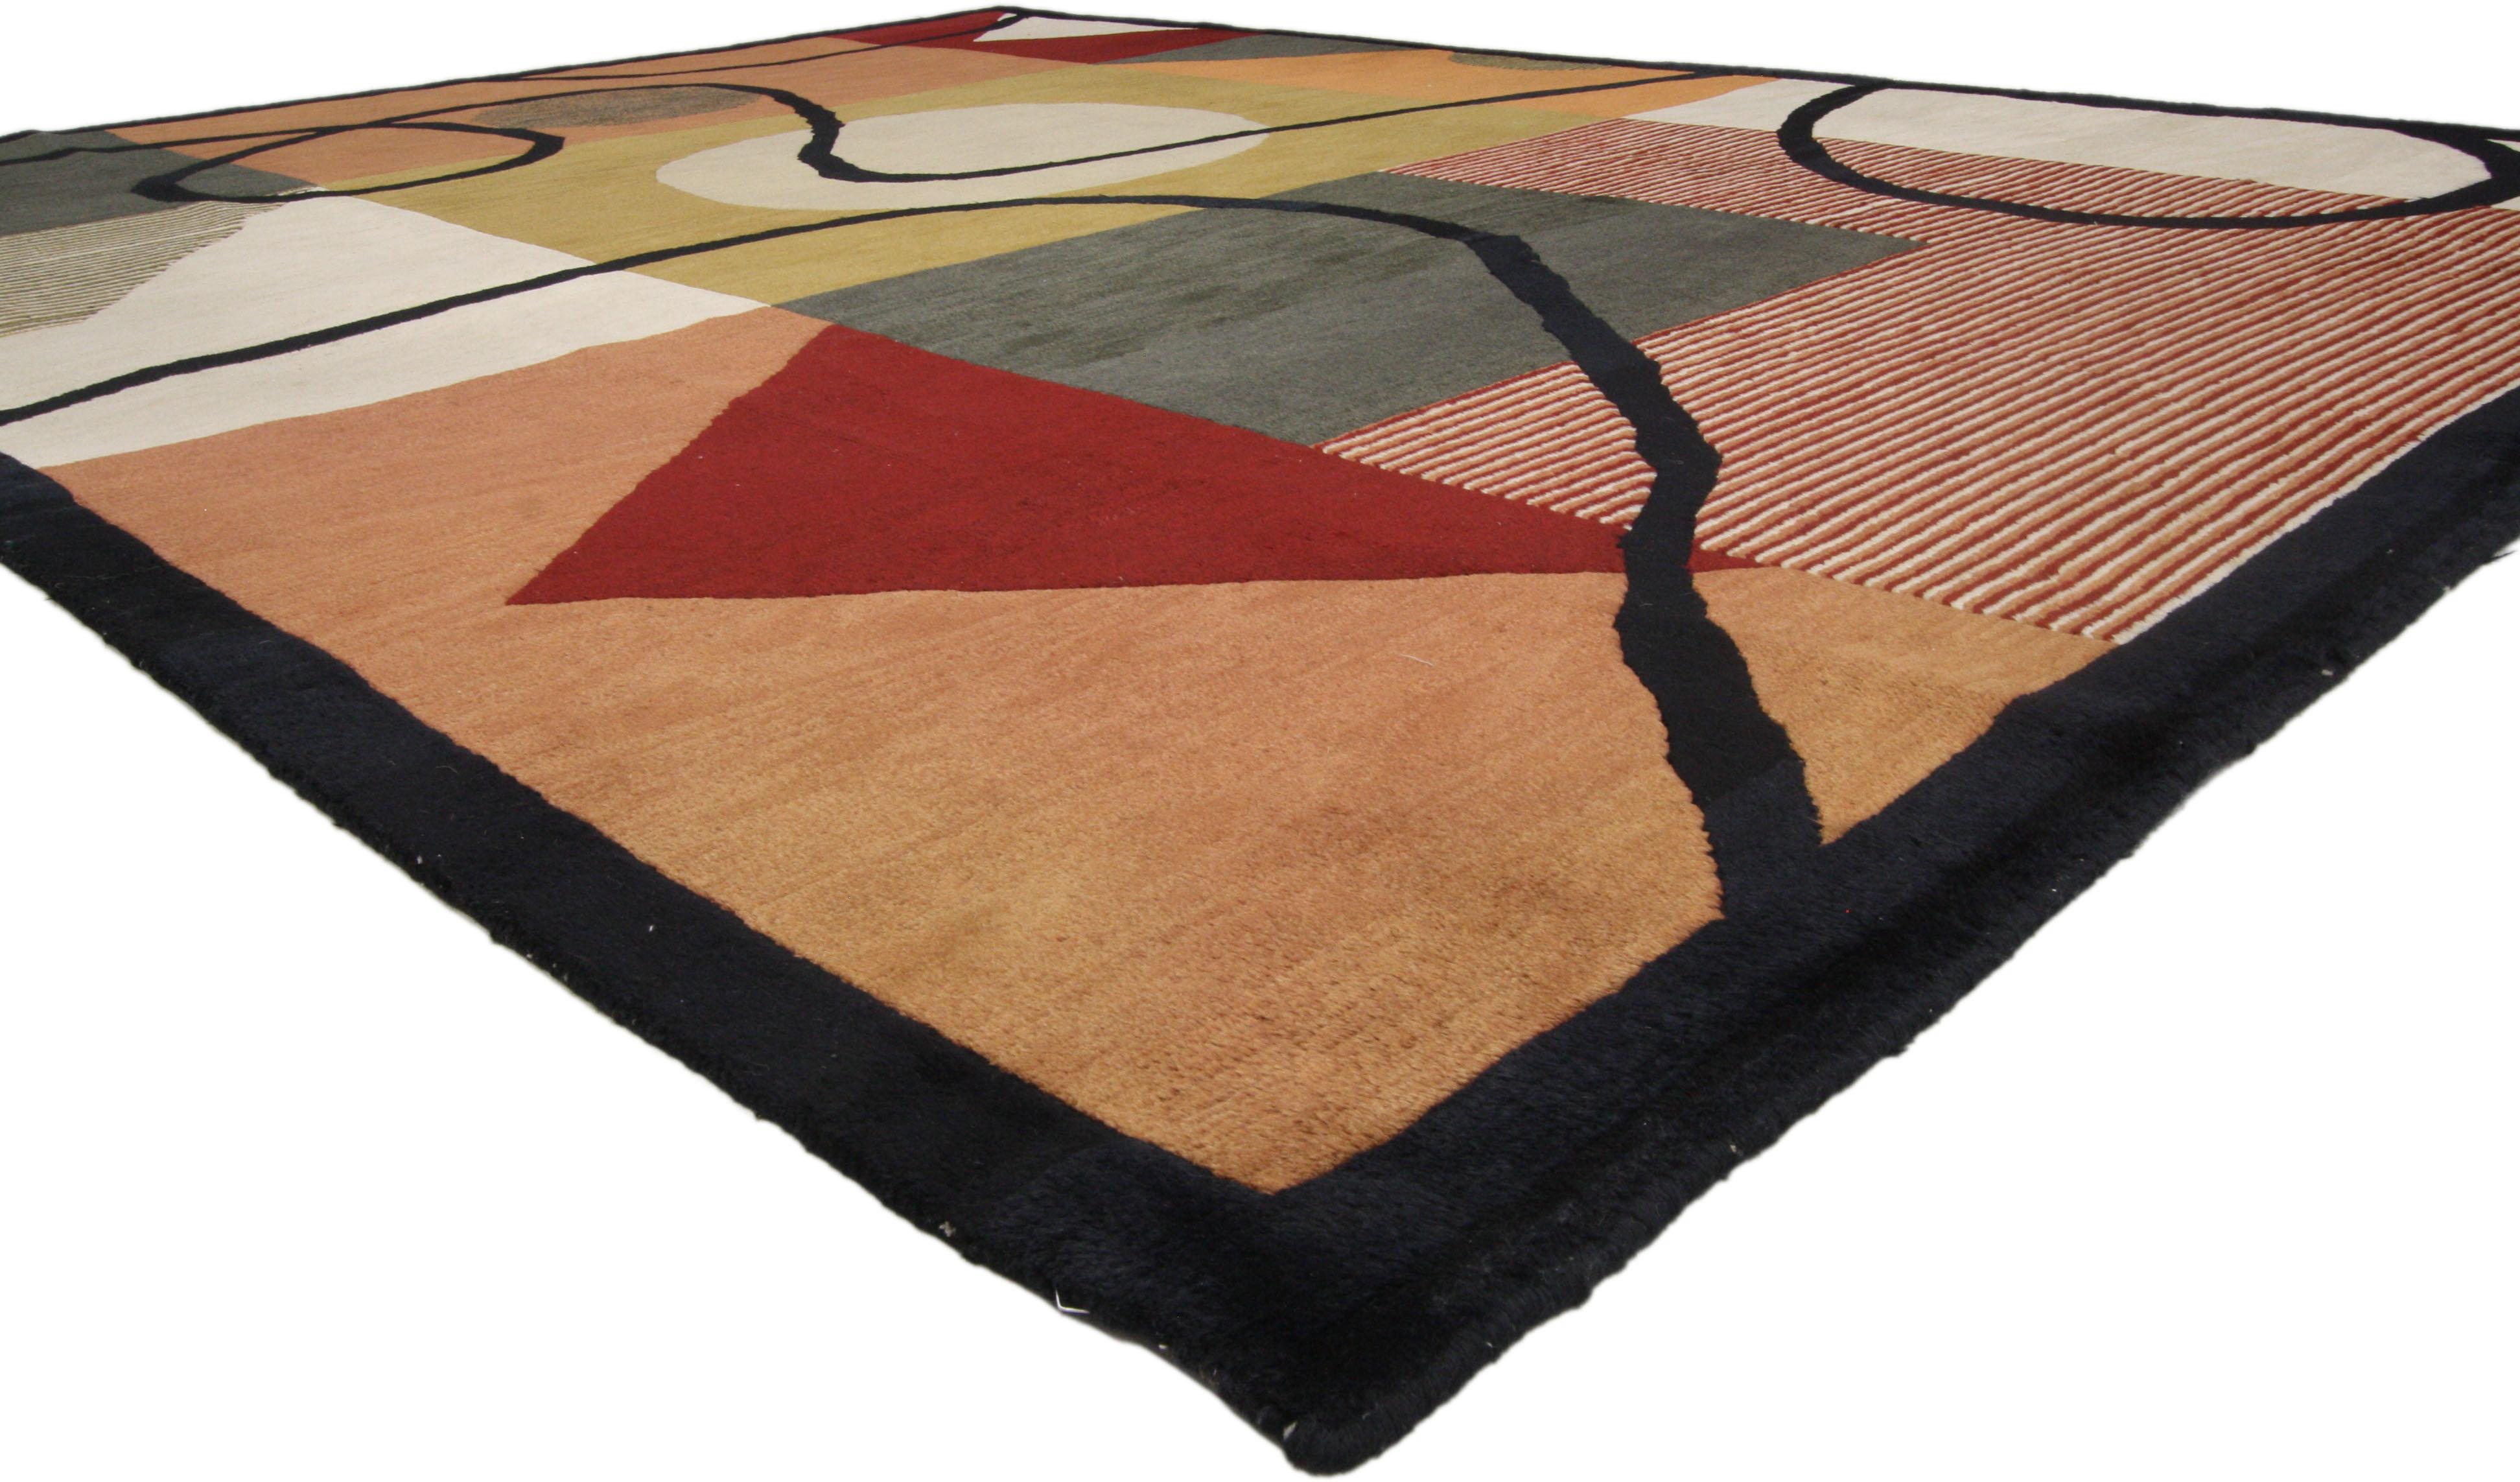 74911, vintage Mid-Century Modern style abstract area rug. Linear and graphic, this hand knotted wool vintage Mid-Century Modern style rug features a modernized hard-edge cubism style with Abstract Expressionism. The field of earth-toned shapes and